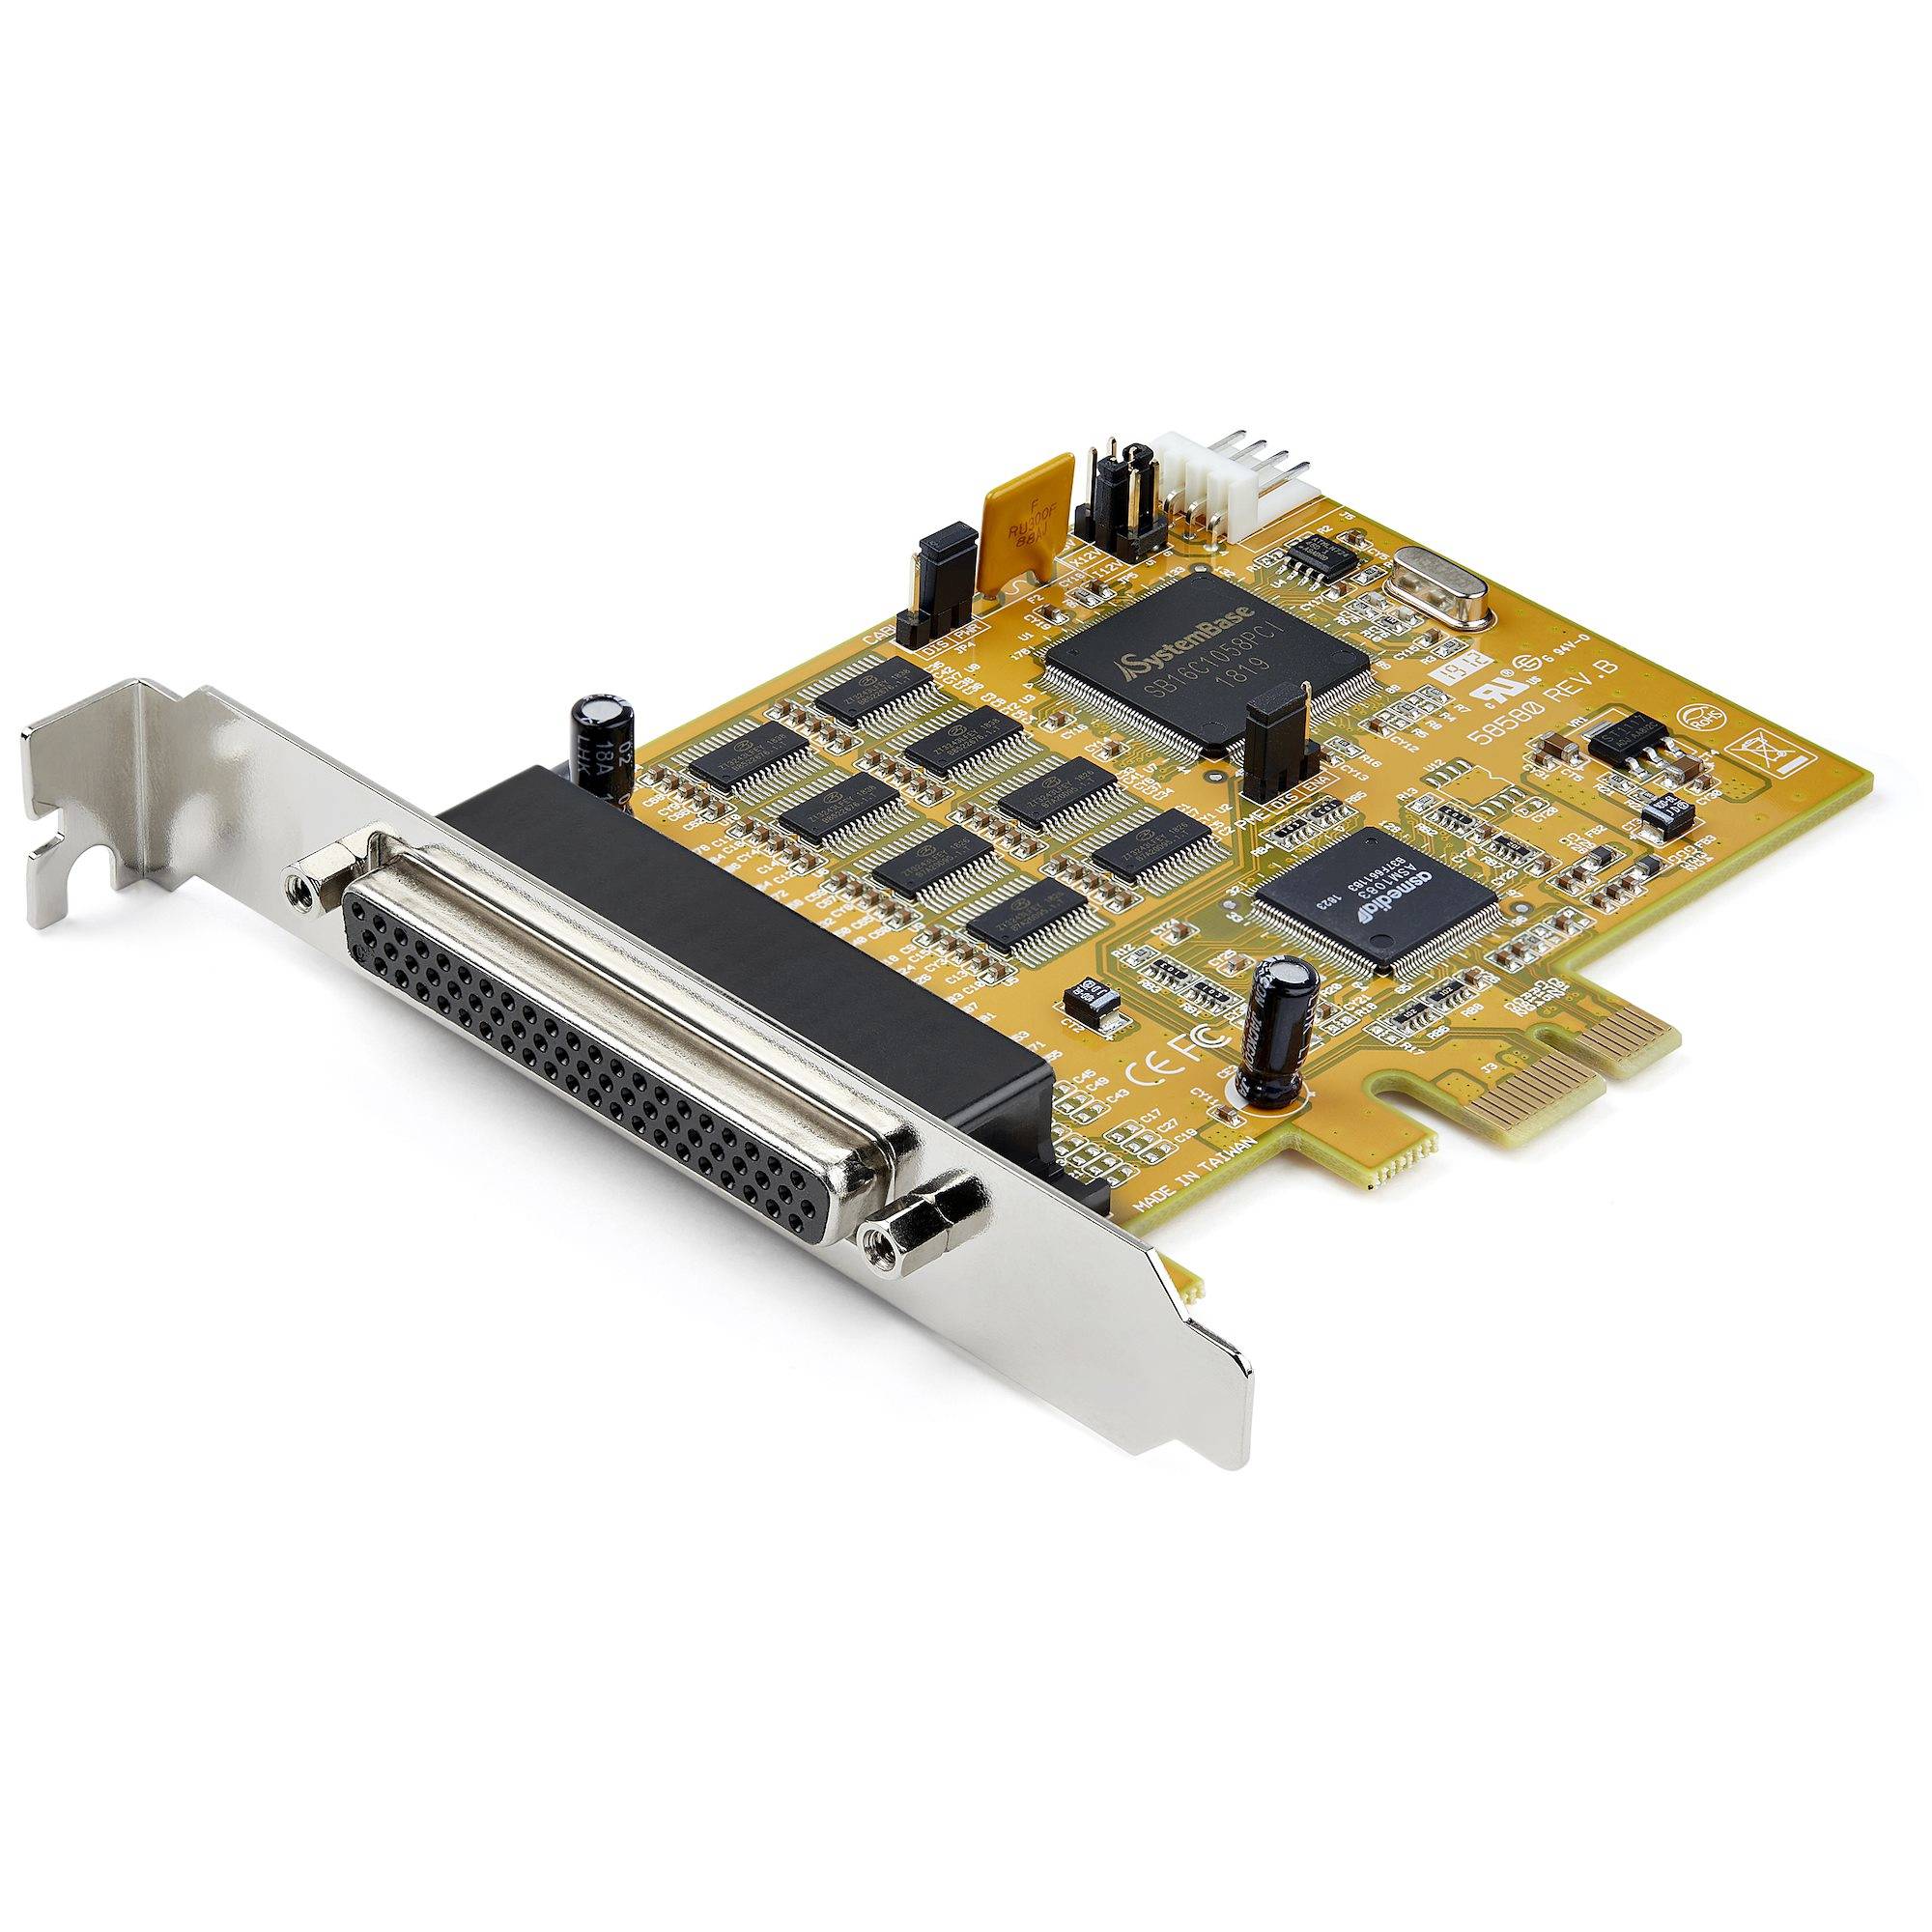 Rca Informatique - Image du produit : 8-PORT PCI EXPRESS RS232 SERIAL ADAPTER CARD - PCIE TO SERIAL